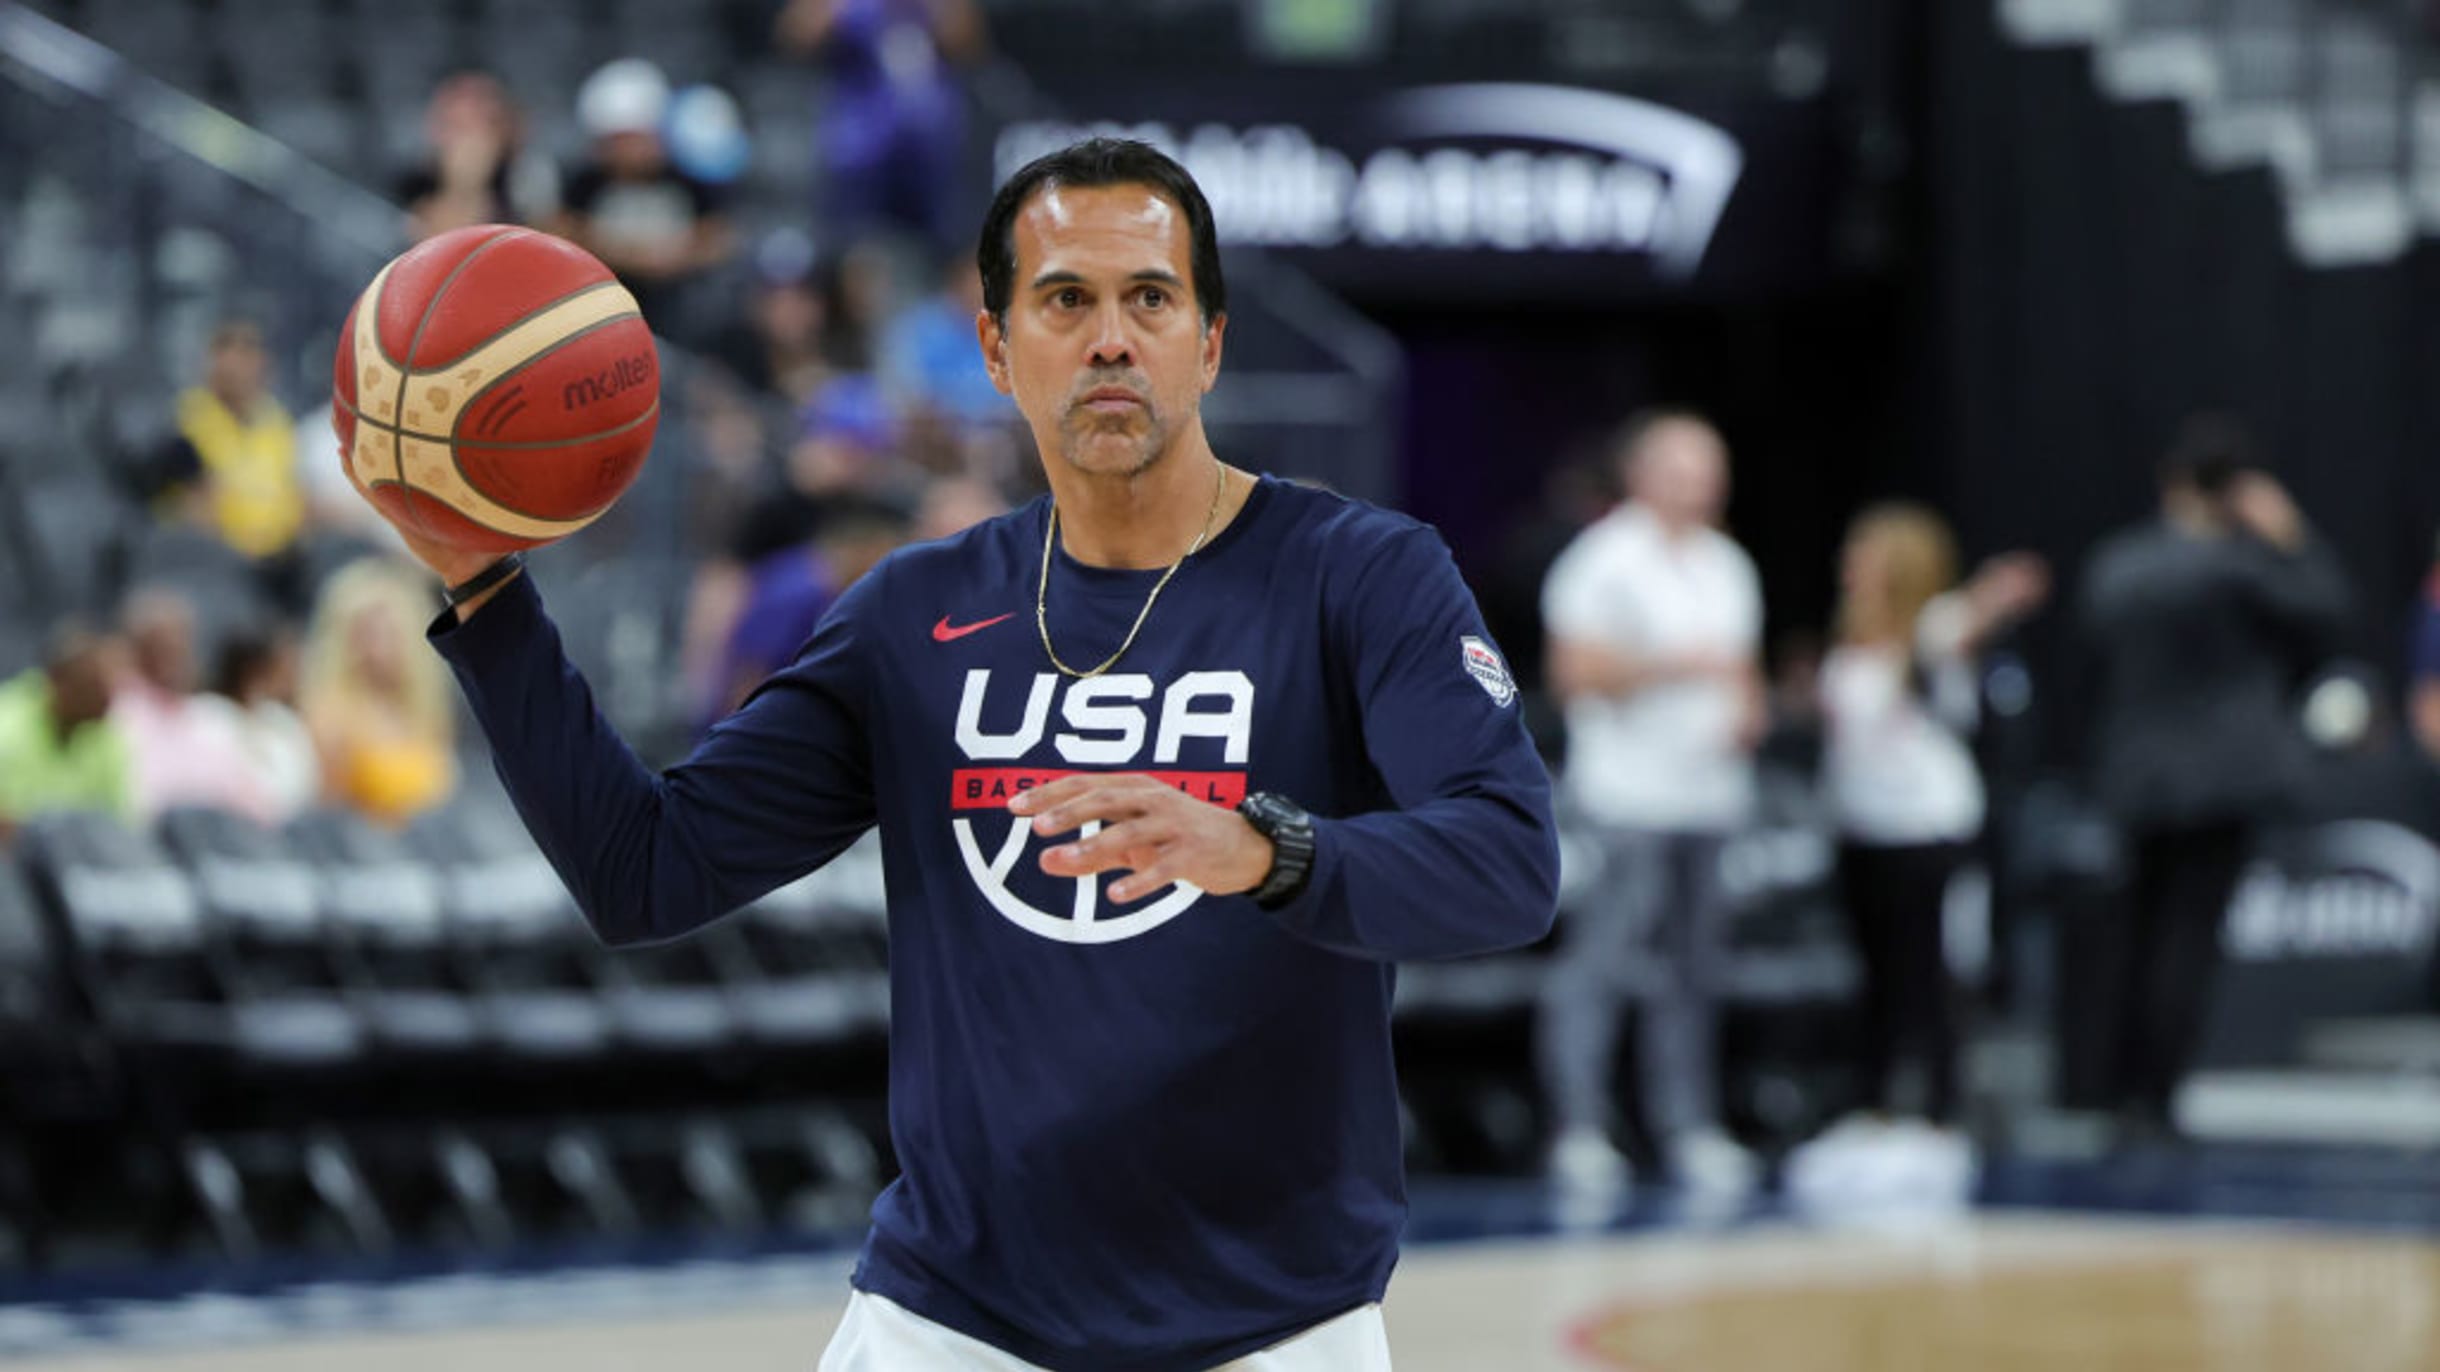 Spoelstra in the Philippines